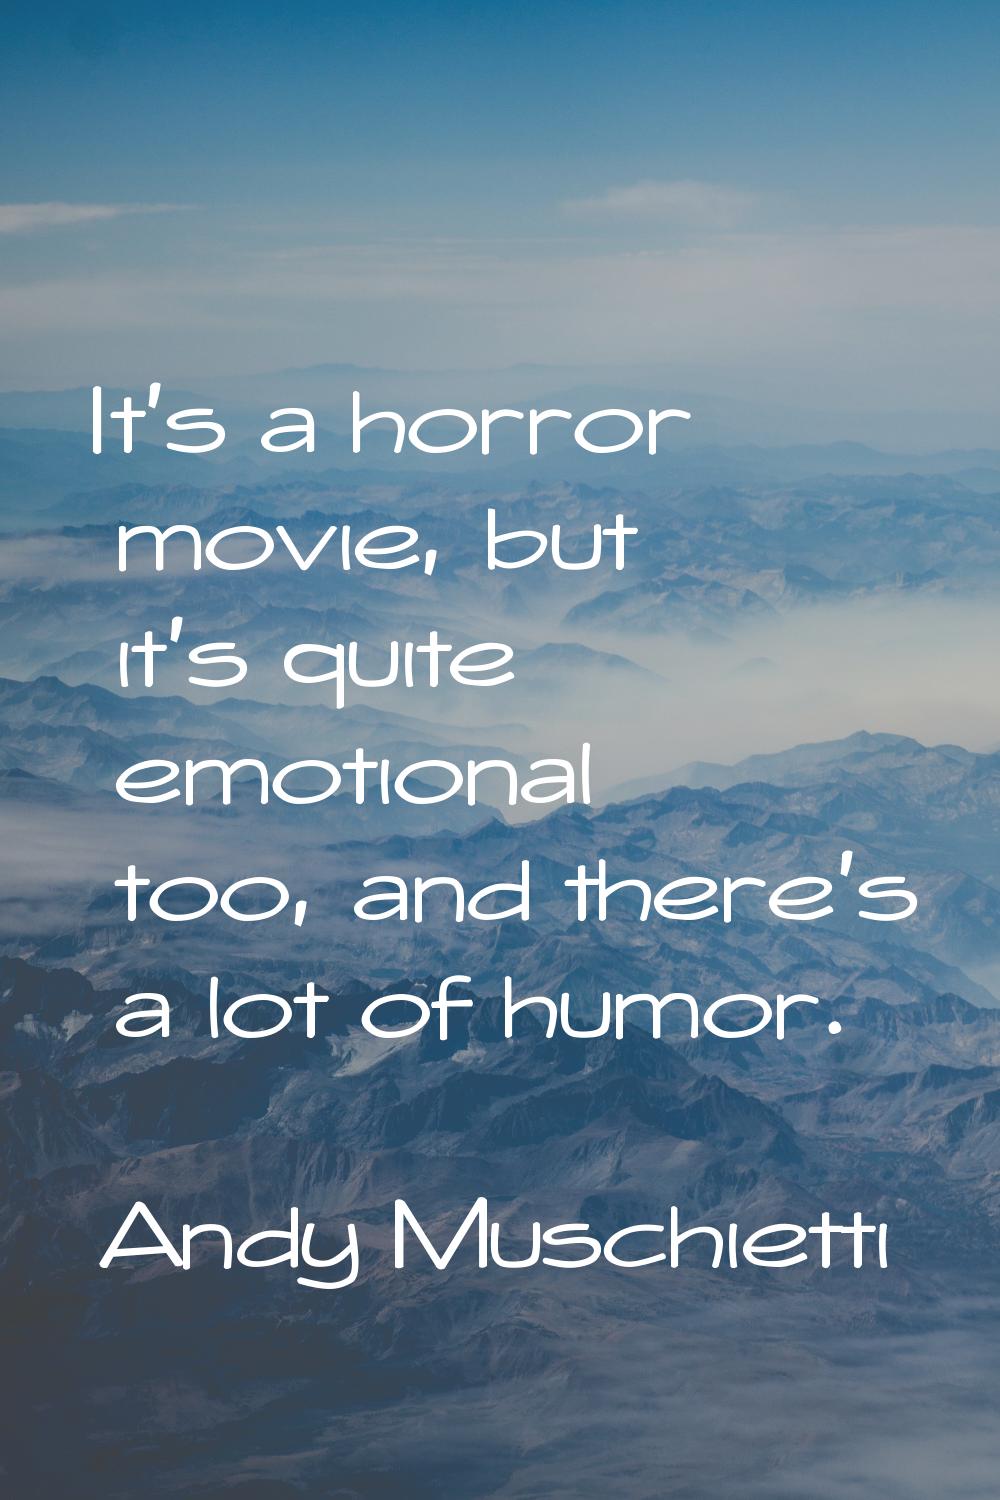 It's a horror movie, but it's quite emotional too, and there's a lot of humor.